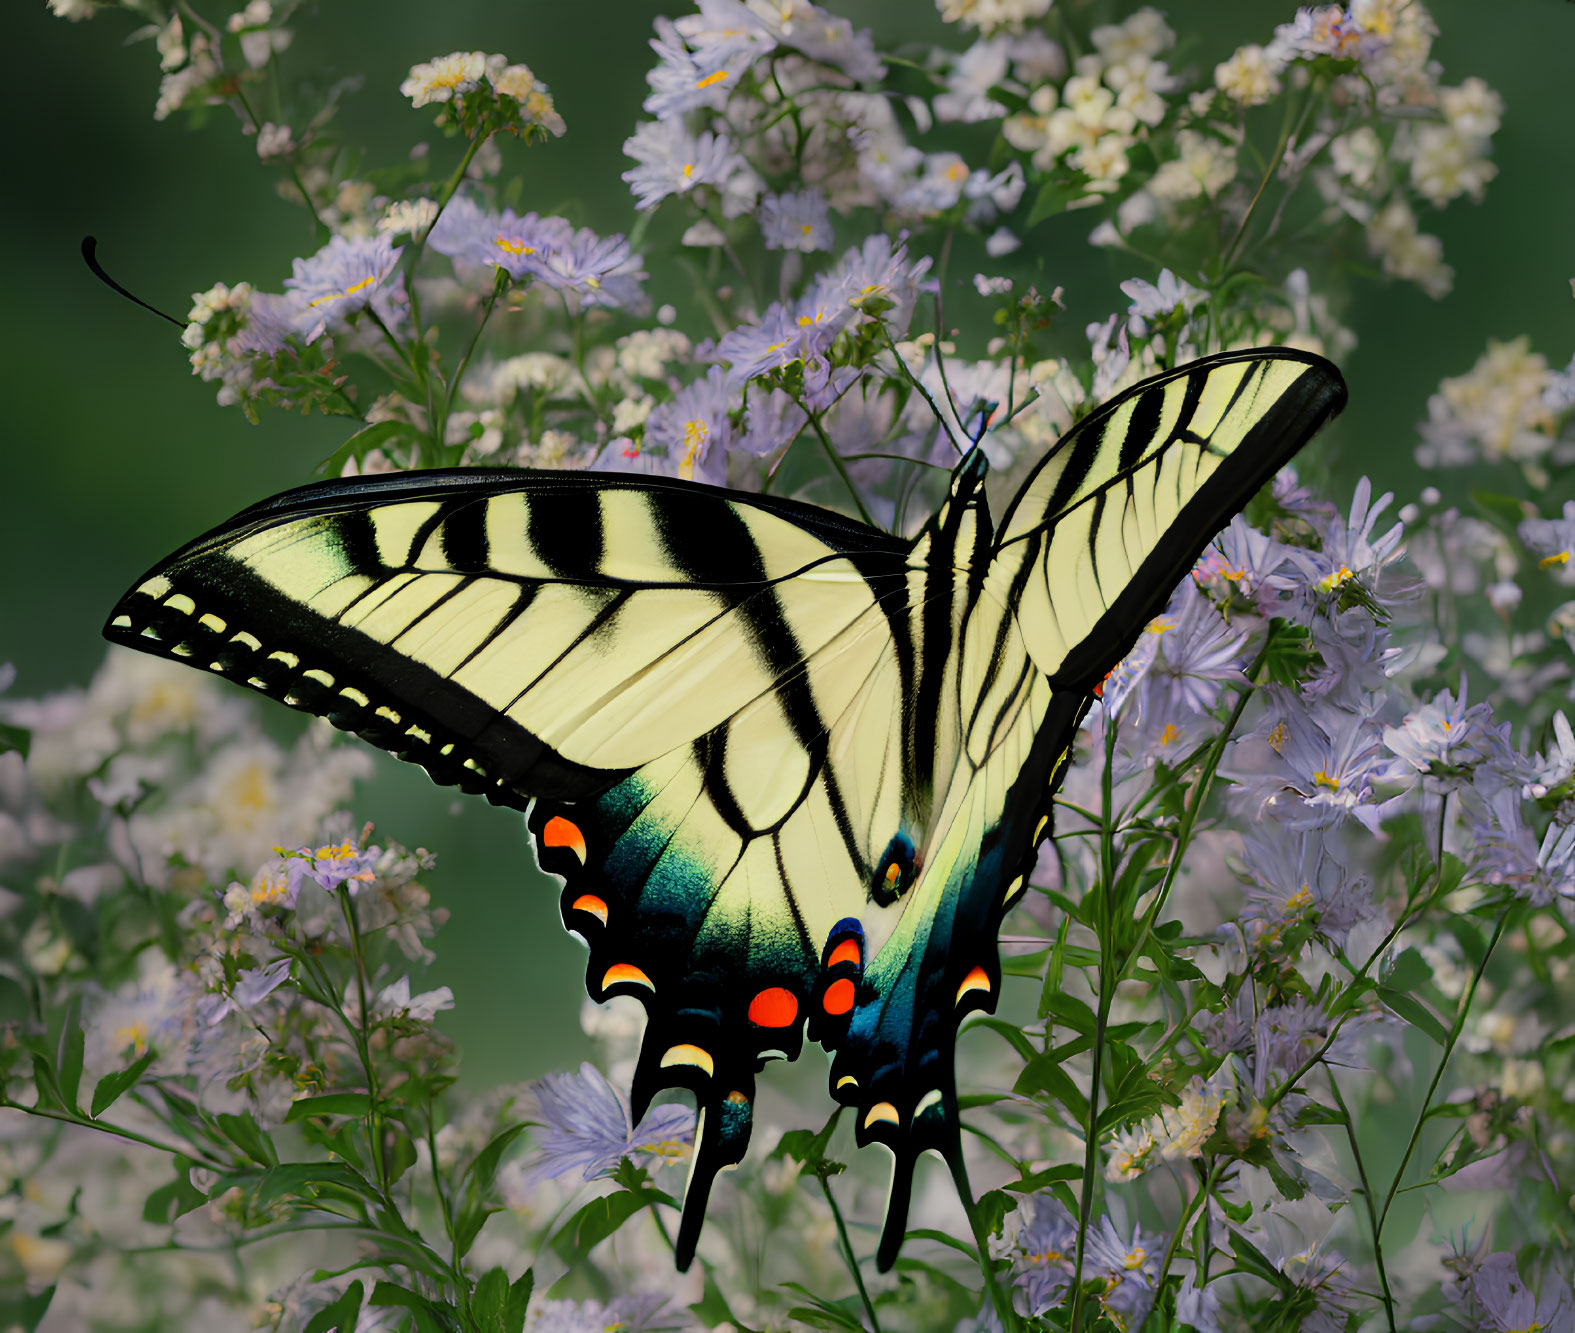 Colorful Butterfly on Purple Flowers in Green Background